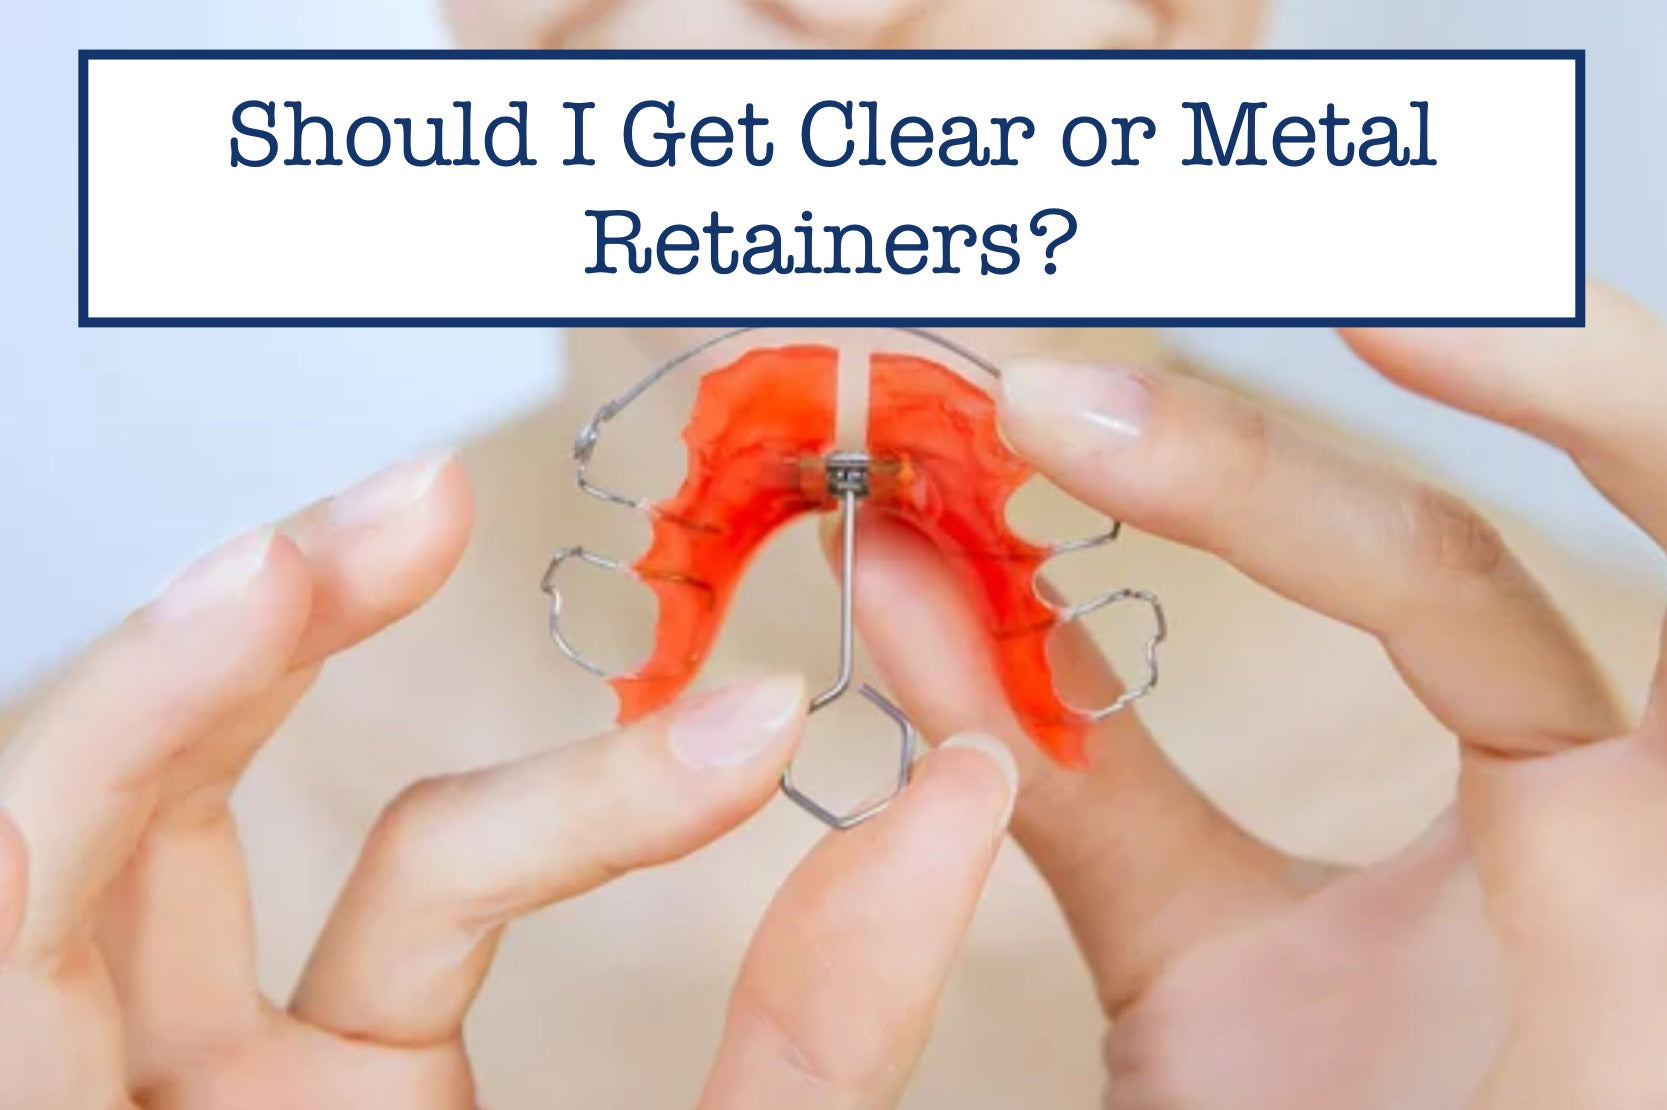 Should I Get Clear or Metal Retainers?